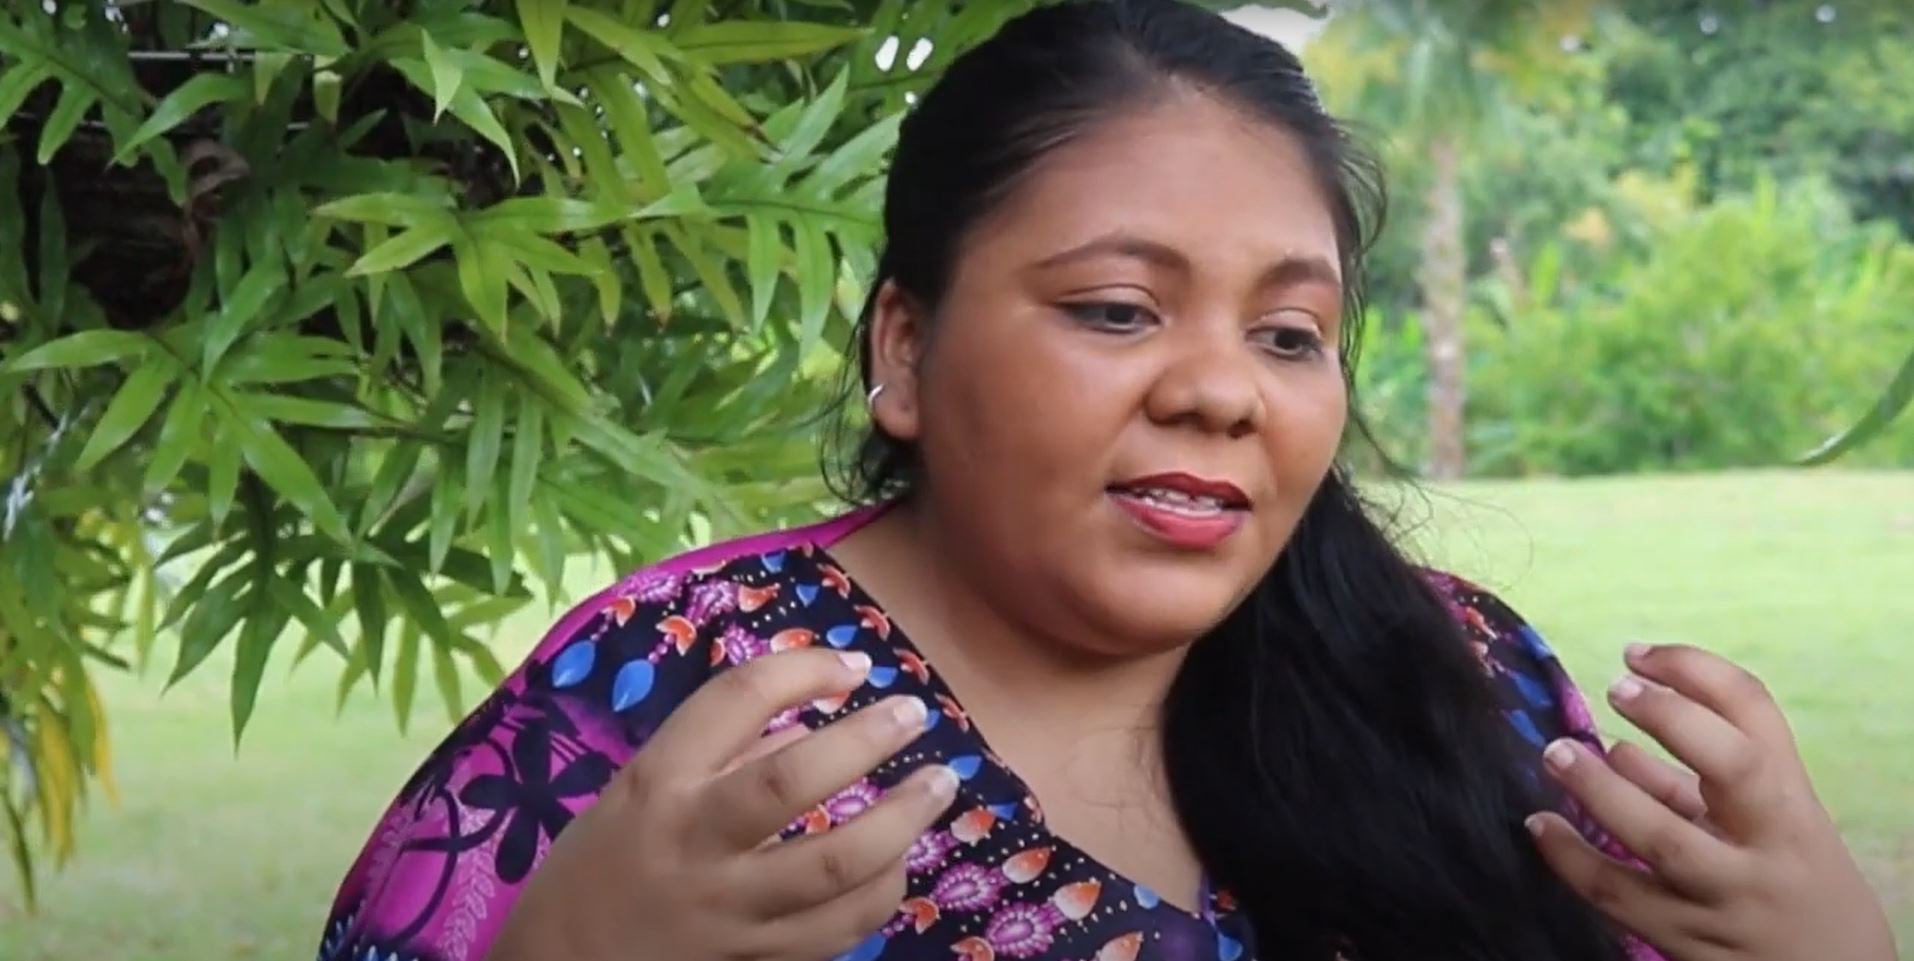 An interview with the Colombian "pickotera" (DJ/MC), artist and researcher, Mily Iriarte, member of the champeta music group, Las Emperadoras.